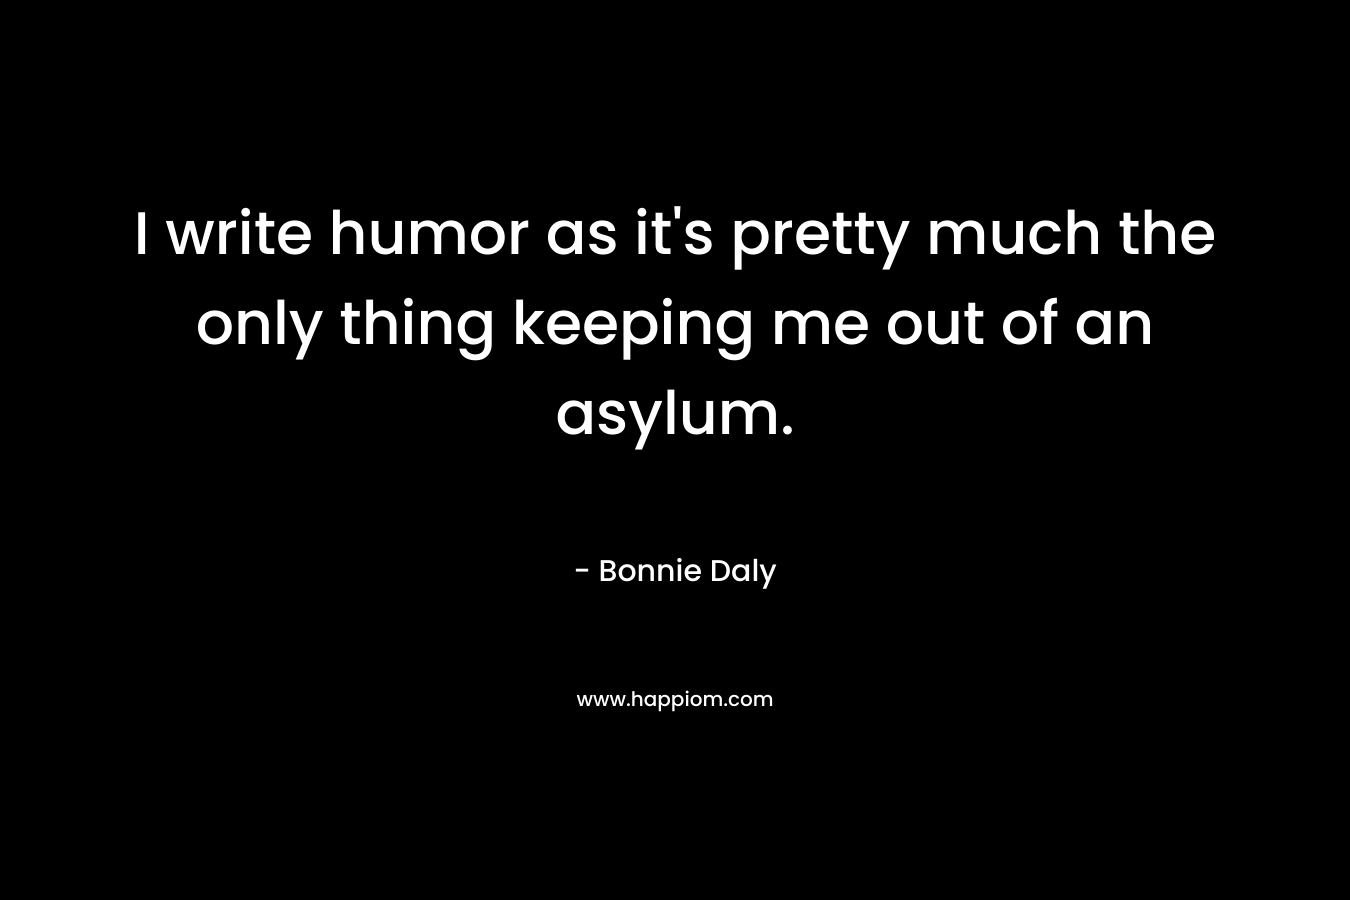 I write humor as it’s pretty much the only thing keeping me out of an asylum. – Bonnie Daly